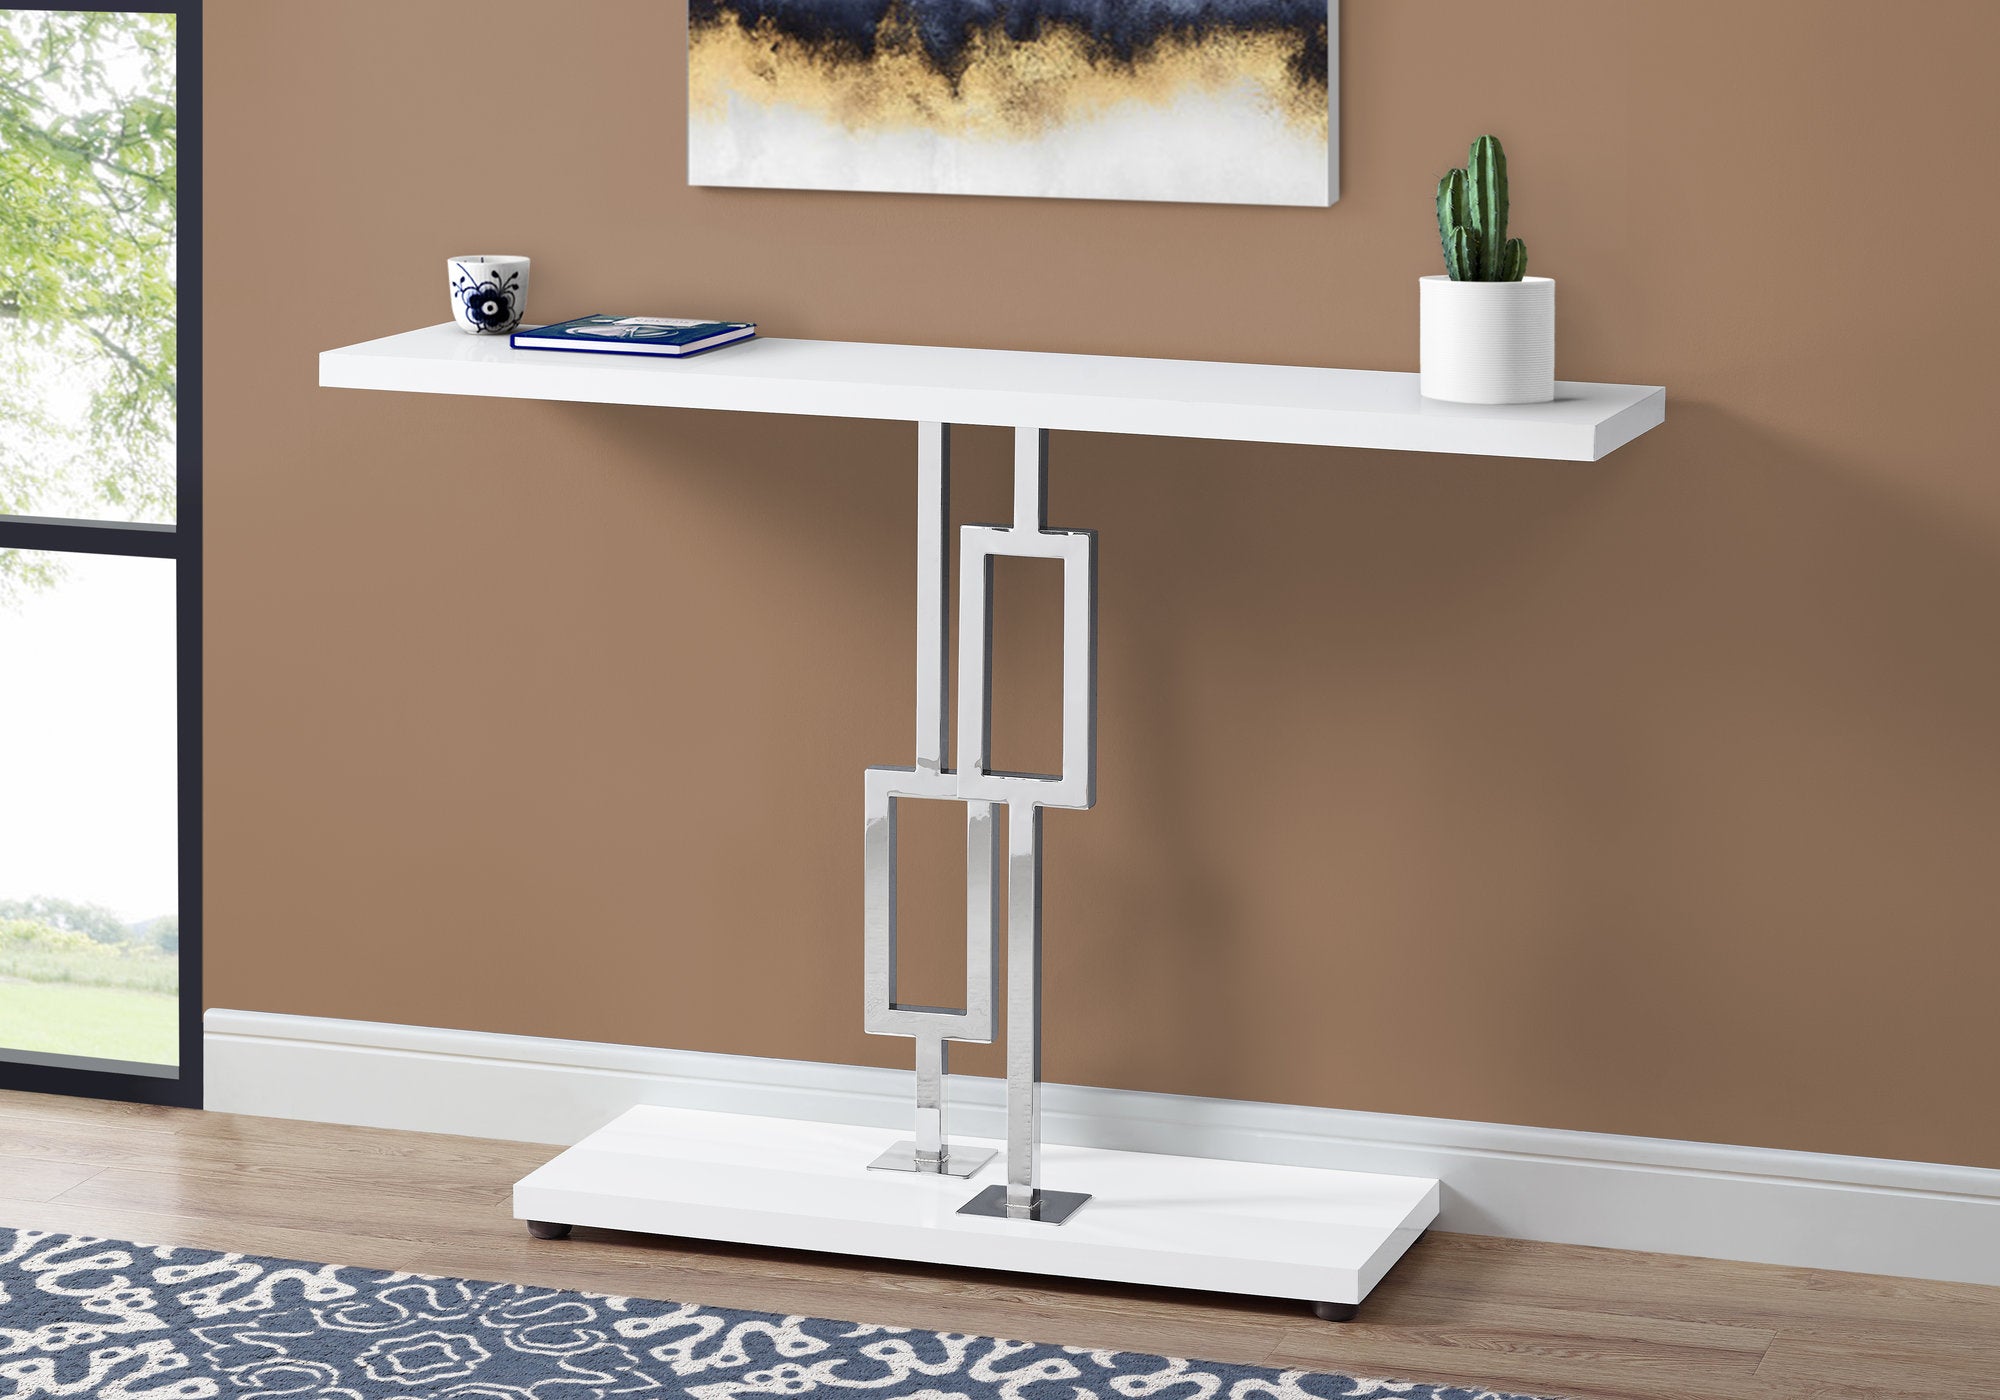 MN-983266    Accent Table, Console, Entryway, Narrow, Sofa, Living Room, Bedroom, Metal Base, Laminate, Glossy White, Chrome, Contemporary, Modern